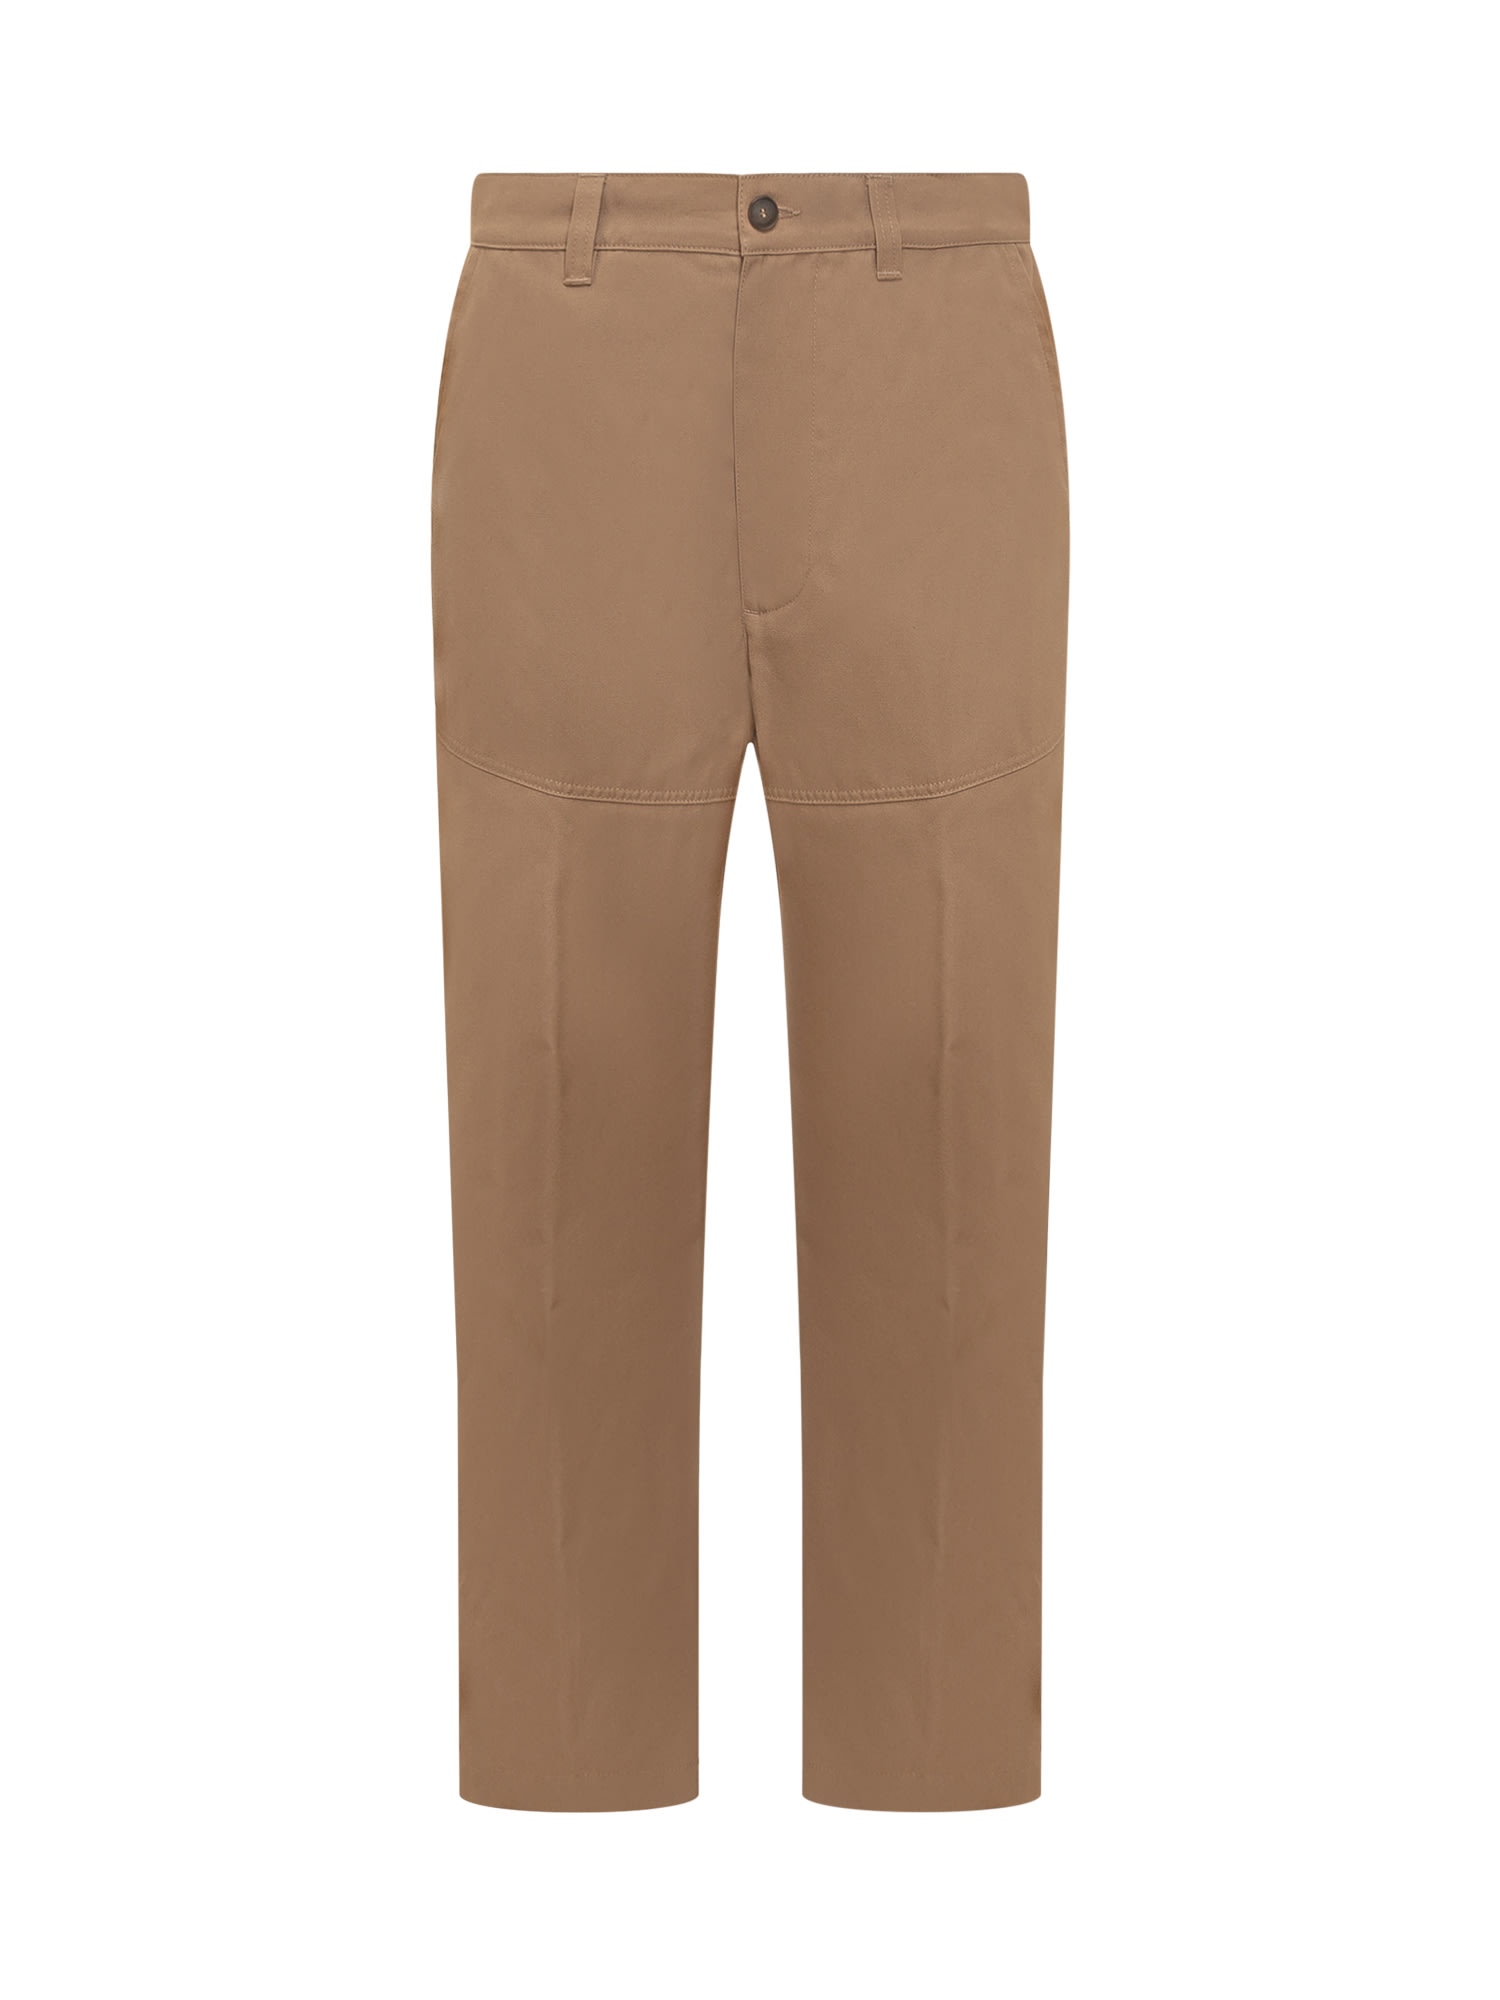 Prospect Trousers